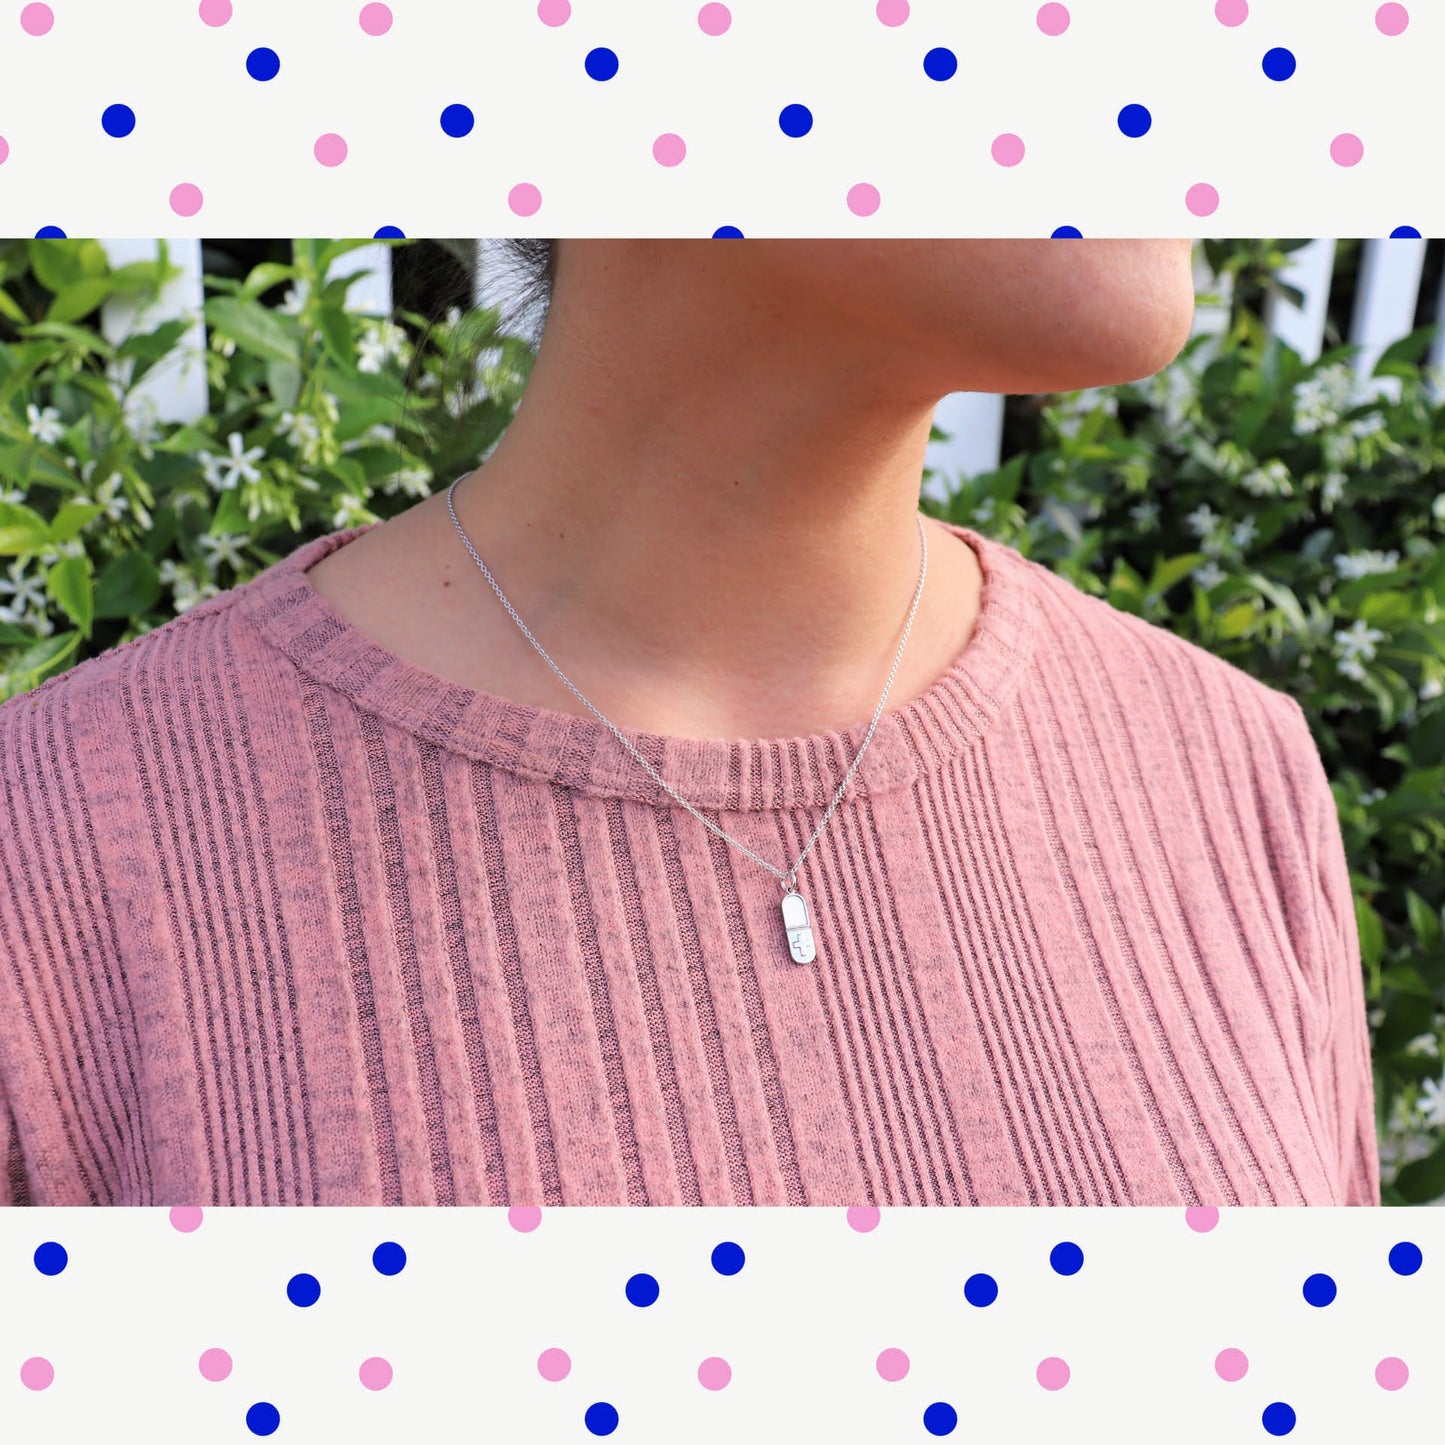 woman in pink shirt in front of white picket fence in garden wearing a tiny pill  shaped pendant necklace